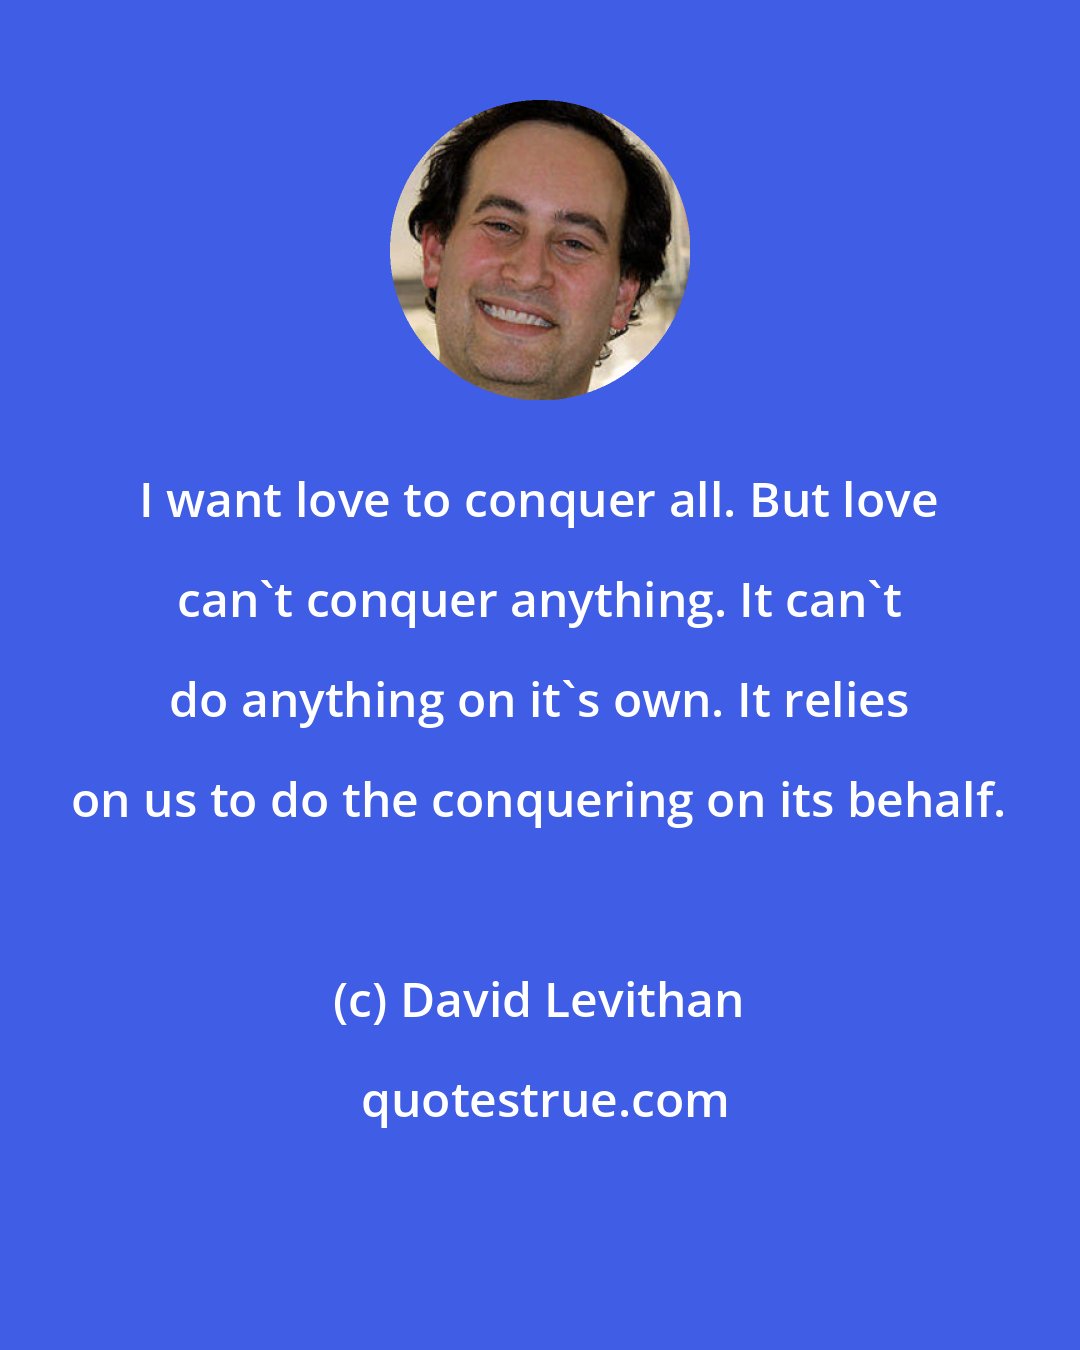 David Levithan: I want love to conquer all. But love can't conquer anything. It can't do anything on it's own. It relies on us to do the conquering on its behalf.